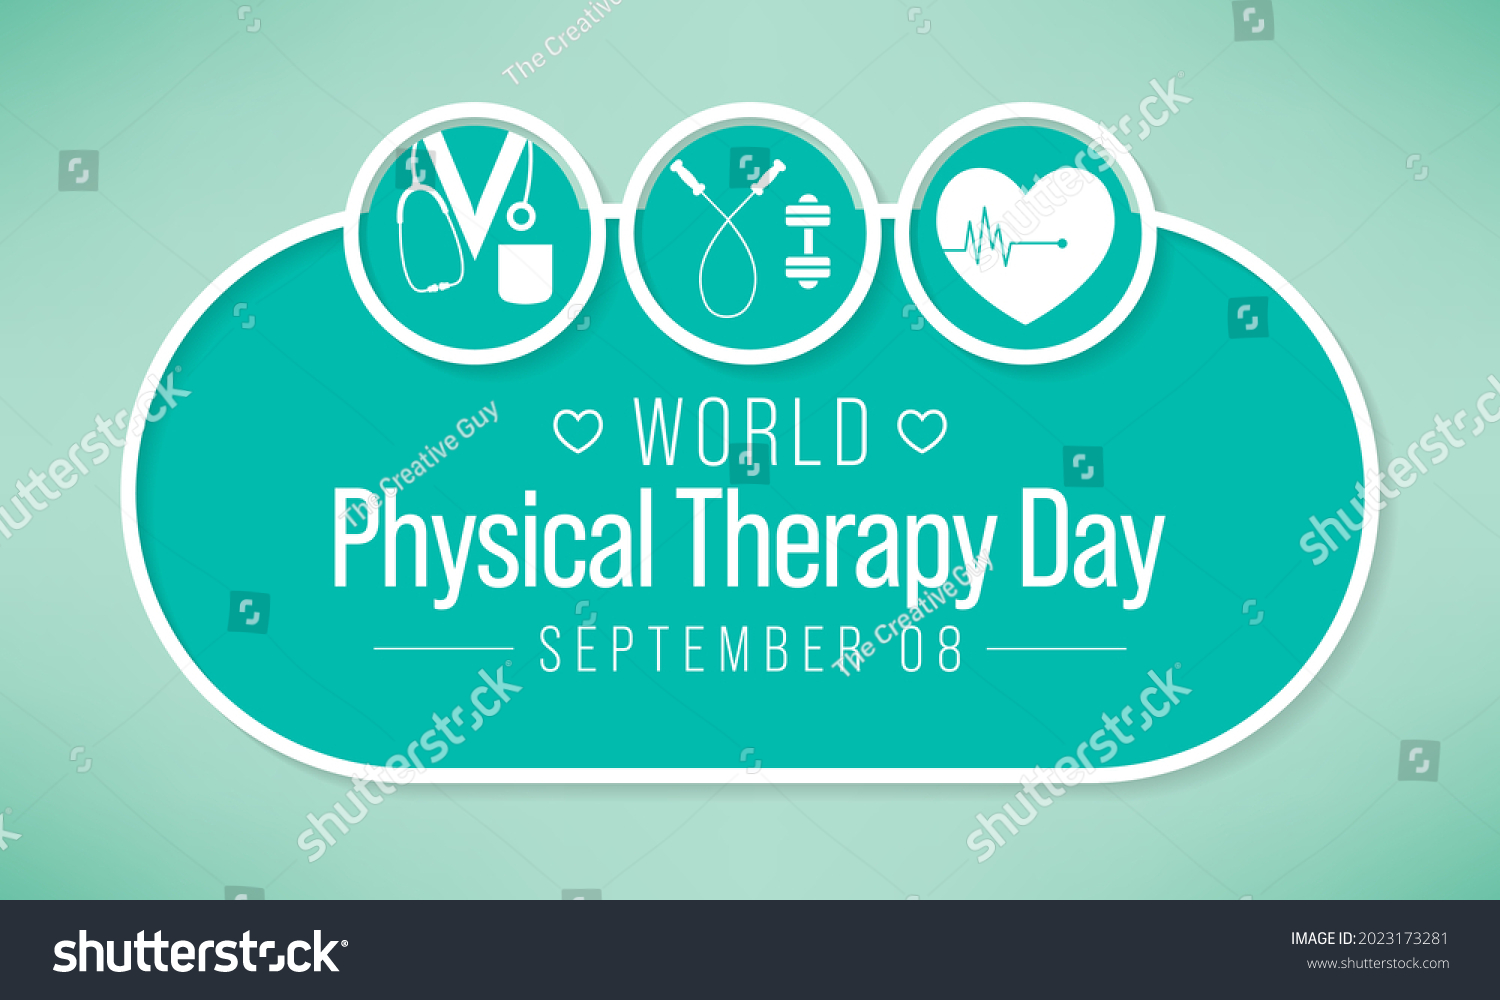 462 World physiotherapy day Images, Stock Photos & Vectors Shutterstock